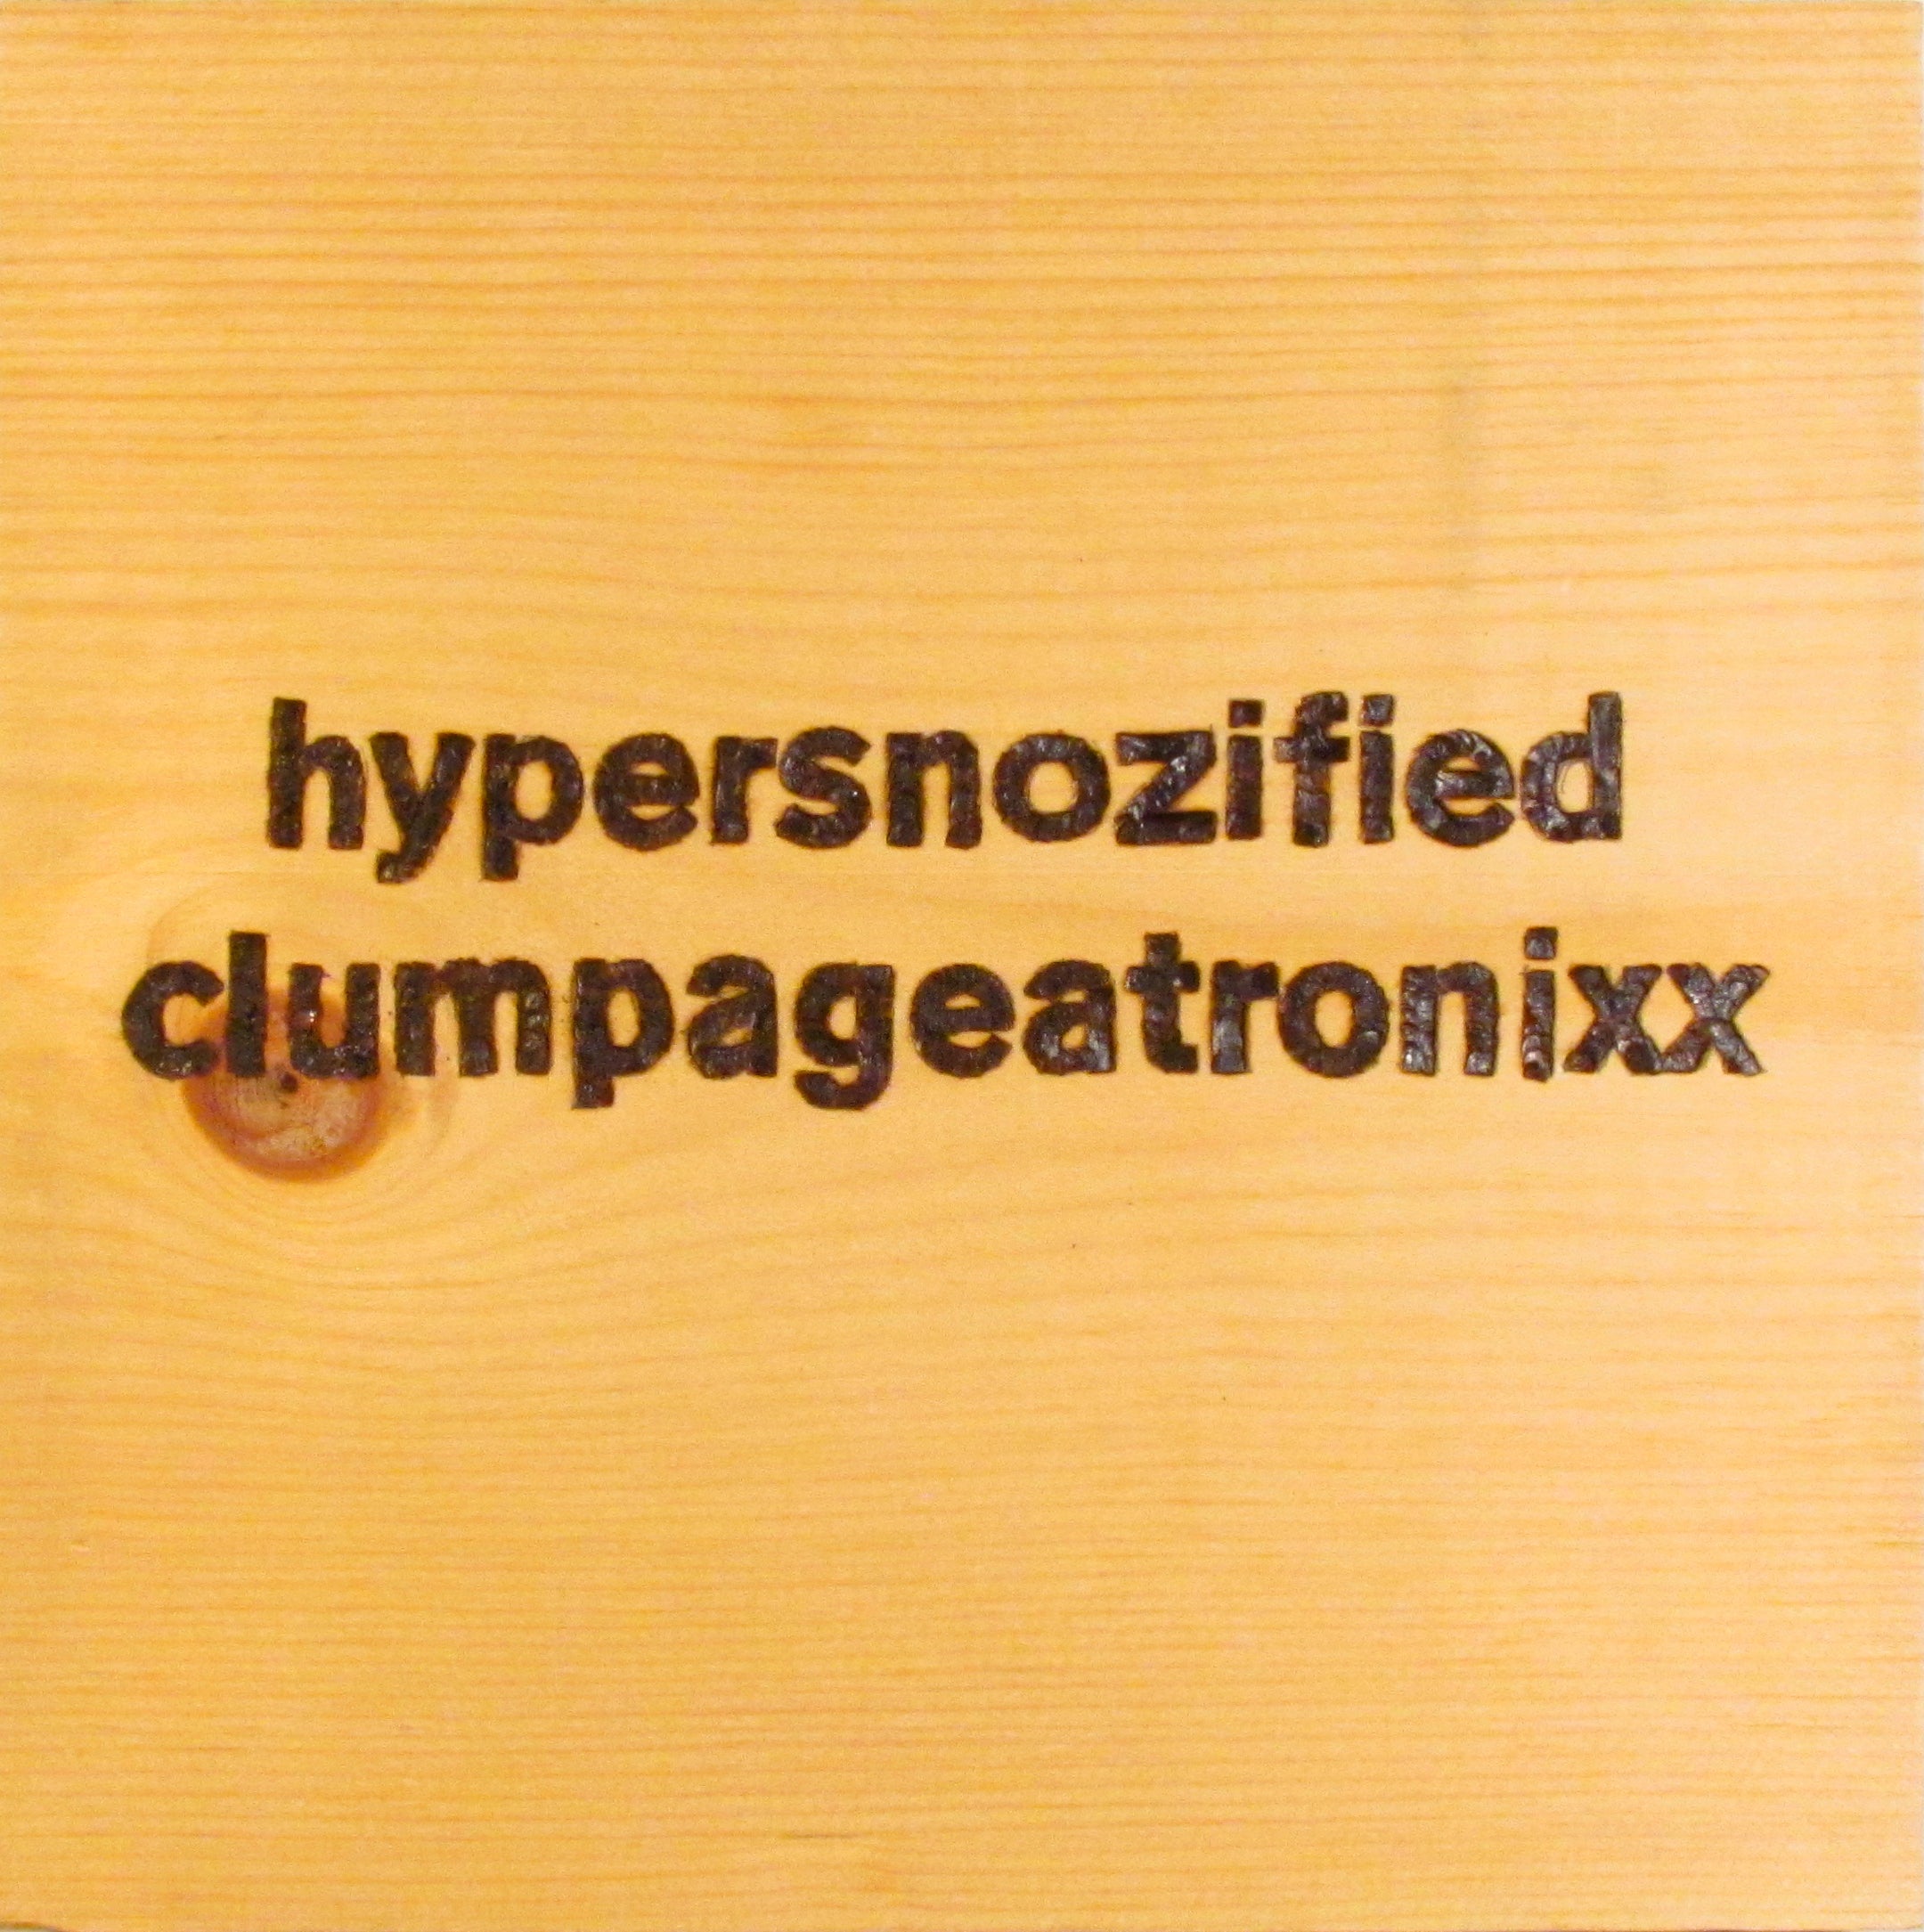 hypersnozified clumpageatronixx - wood panel